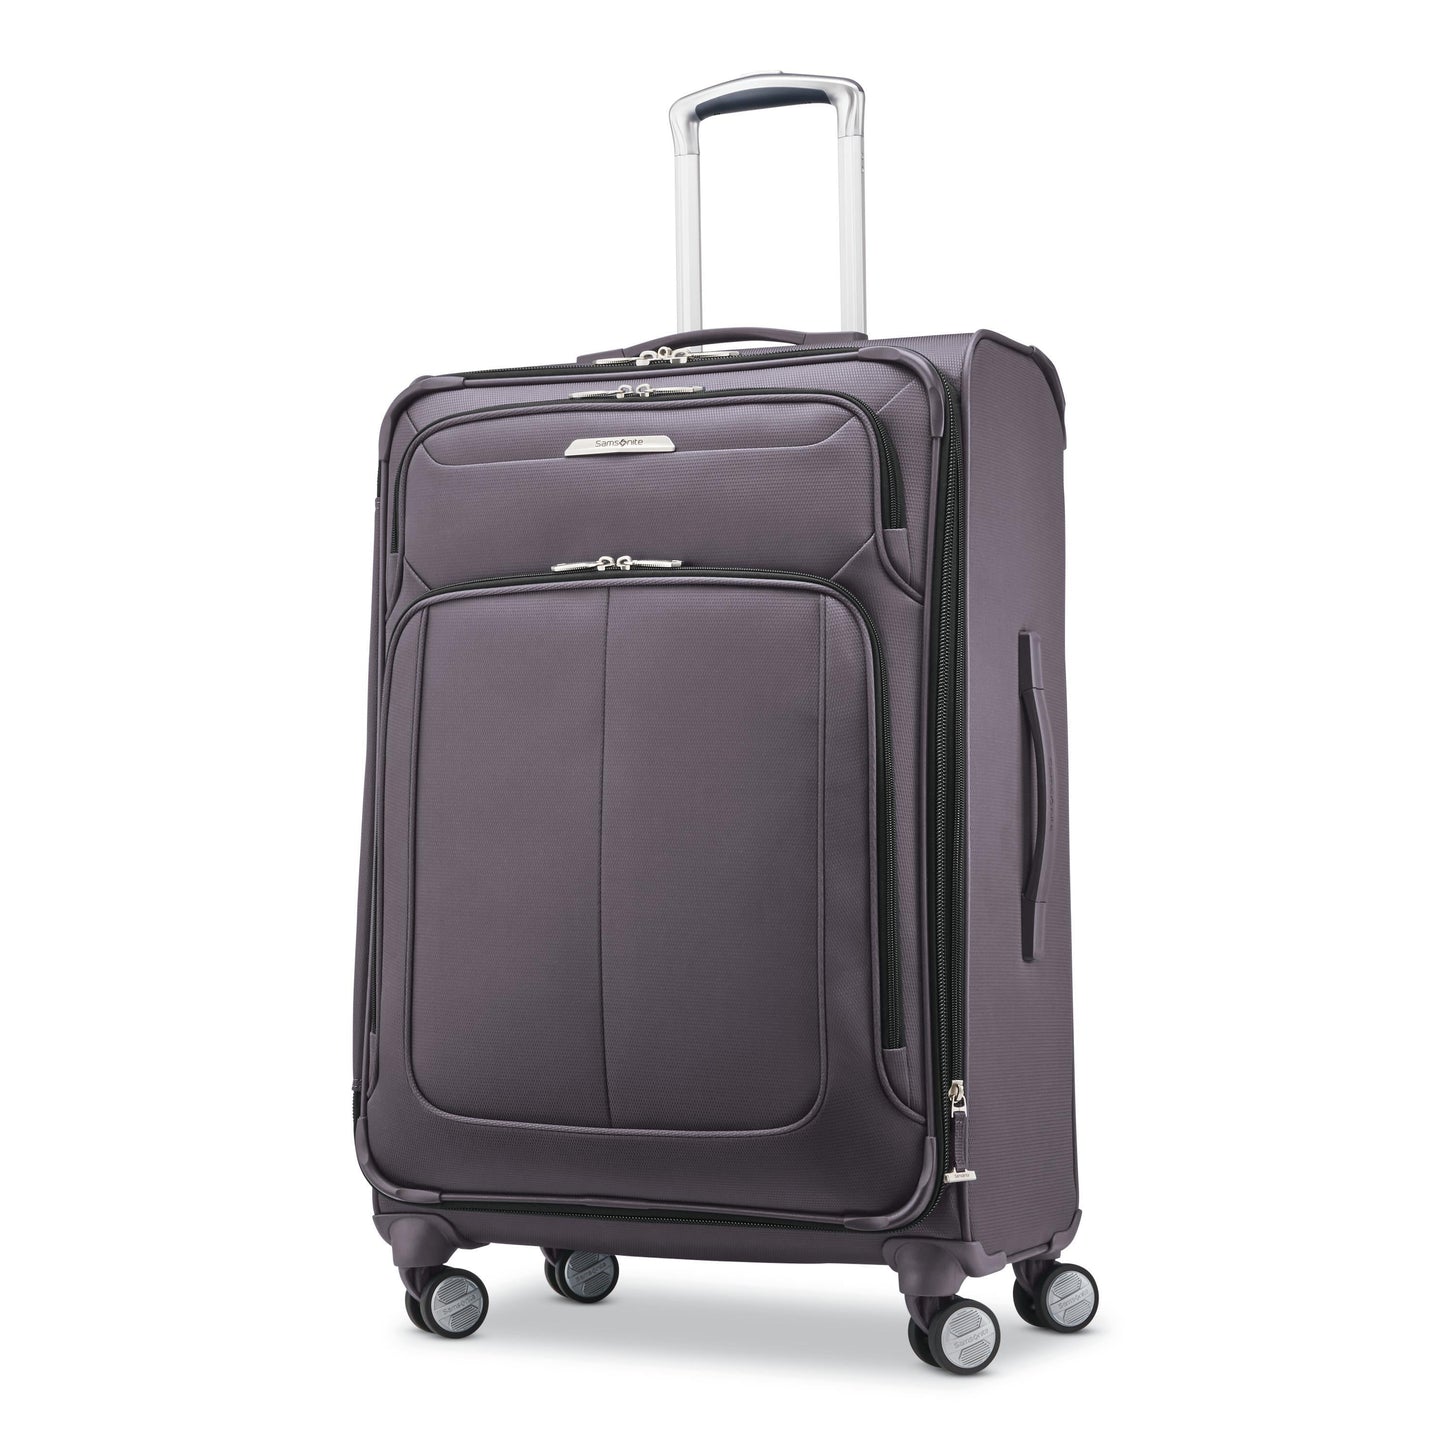 Samsonite SoLyte DLX Softside 25" Expandable Spinner, Mineral Grey